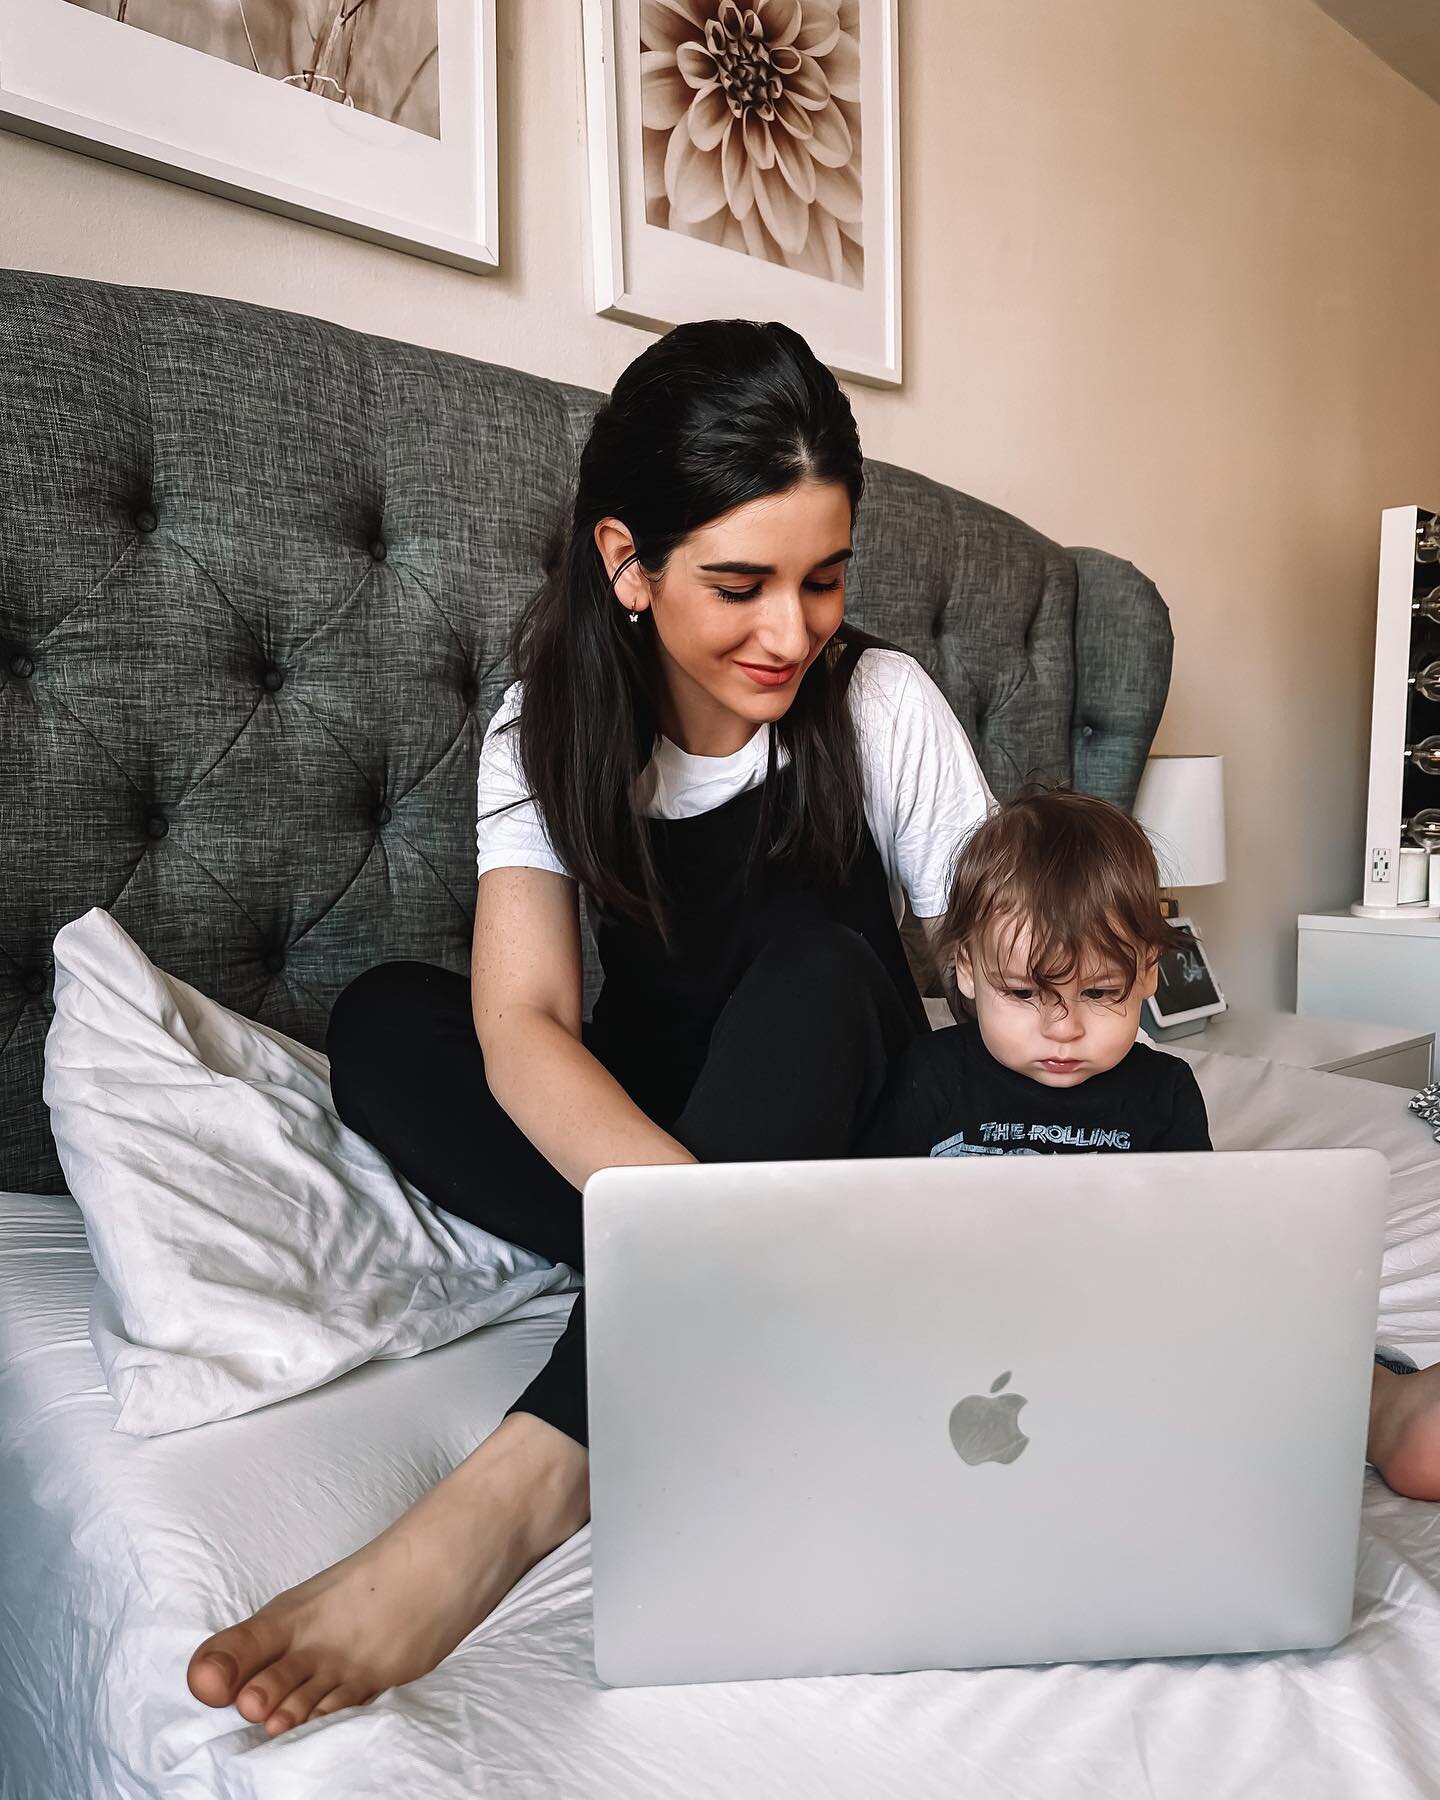 As a working stay at home mom, I truly understand the struggle of not having child care&nbsp;#AD, but let&rsquo;s be honest, it is extremely expensive.

Mayor Adams understands that and is committed to&nbsp;#GetStuffDone, which is why he fought for t